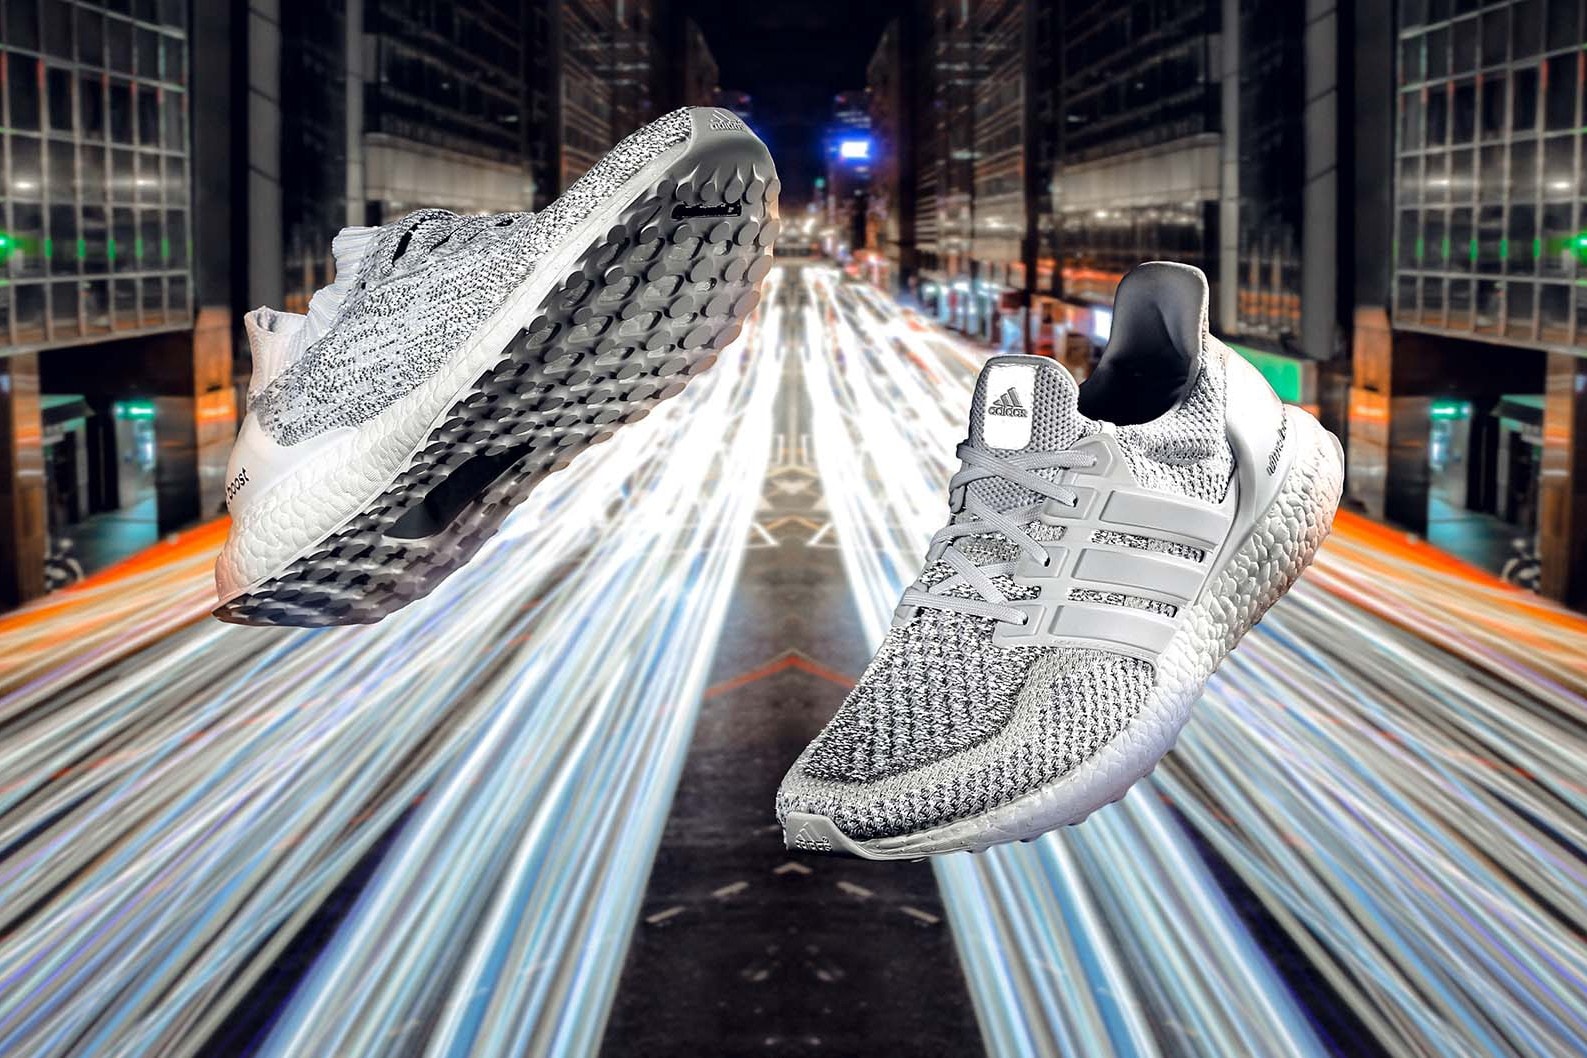 adidas UltraBOOST "White Reflective" Pack